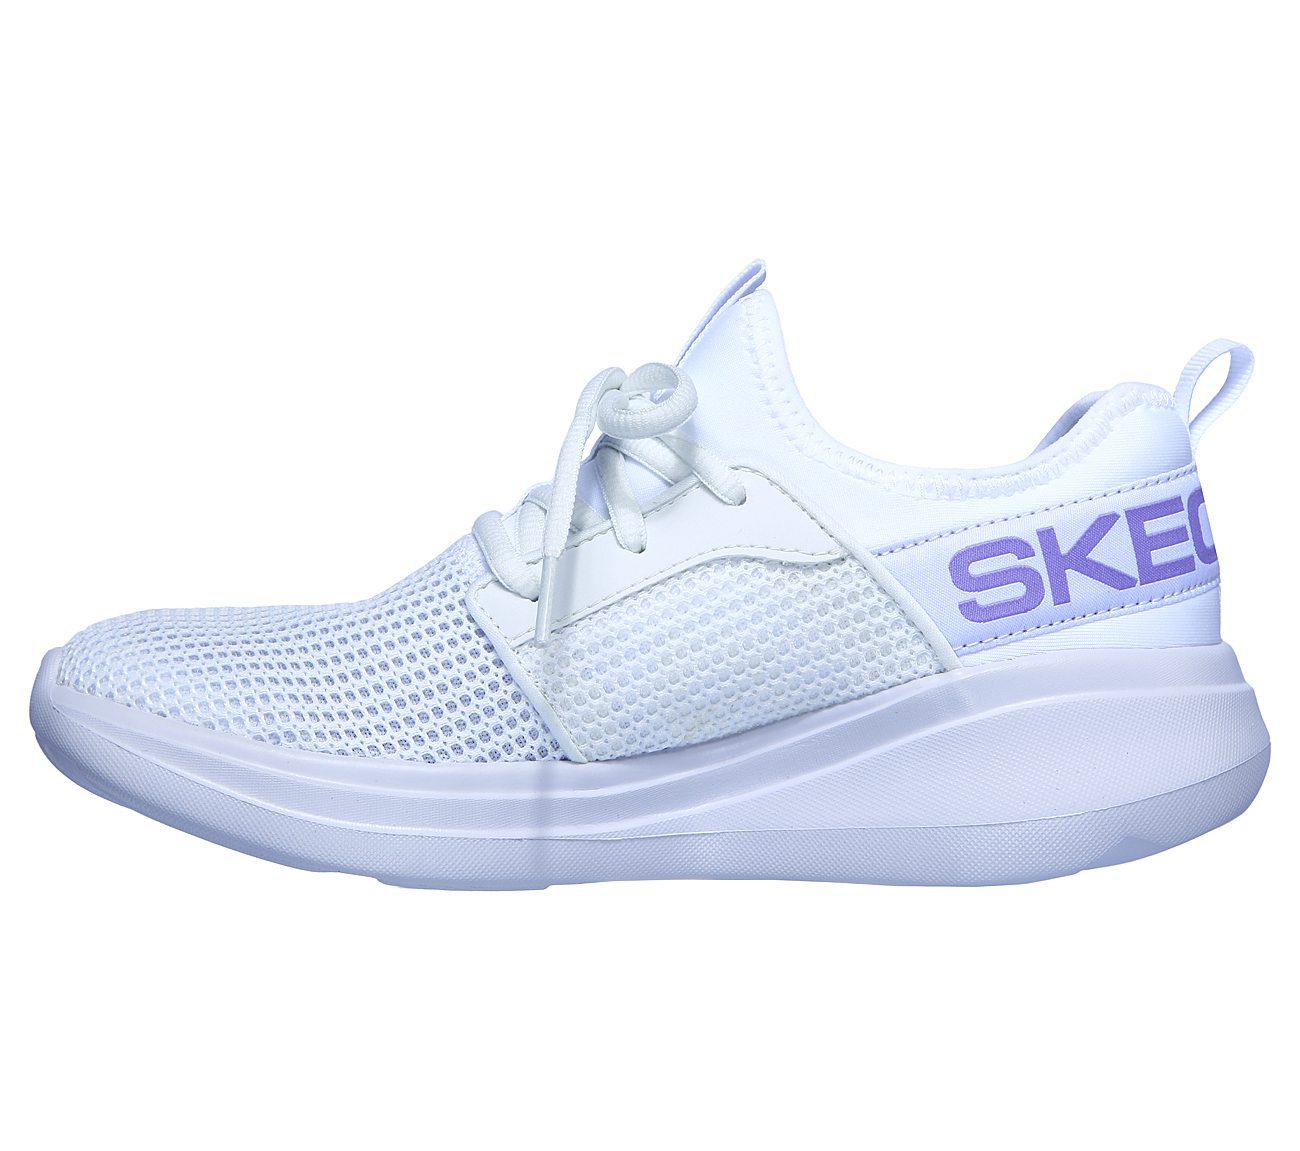 GO RUN FAST - QUICK STEP, WHITE/LAVENDER Footwear Left View